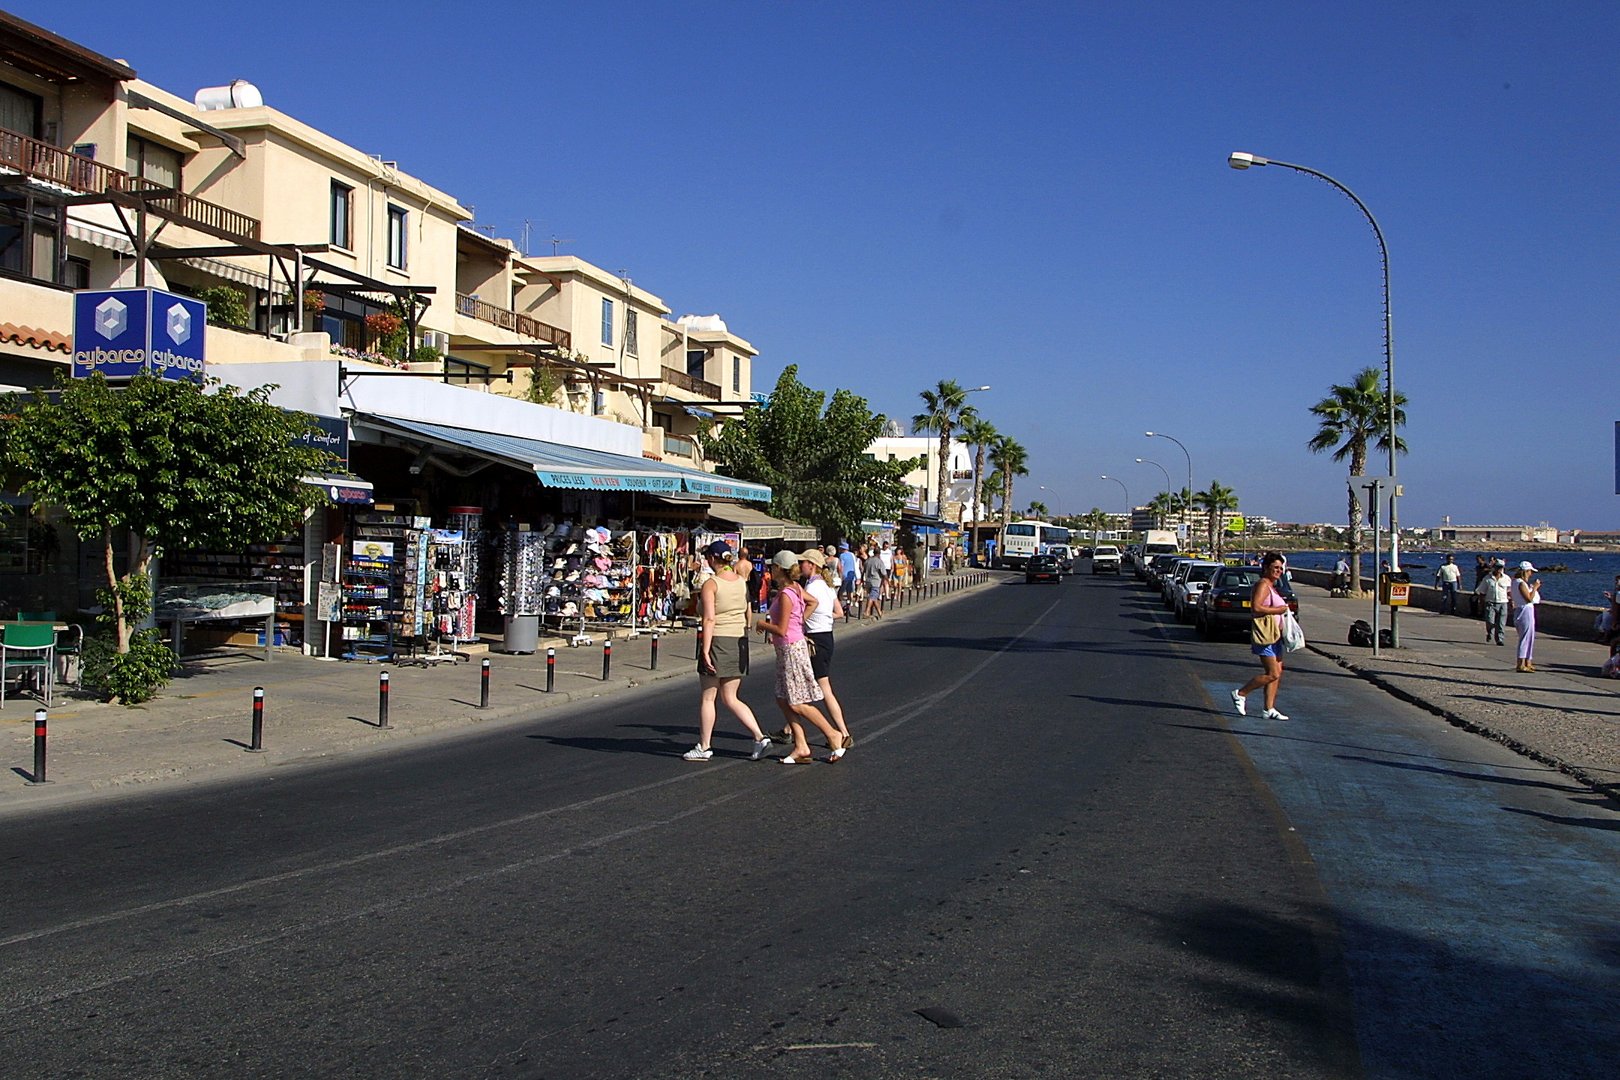 image Strays rounded up in Paphos to boost image